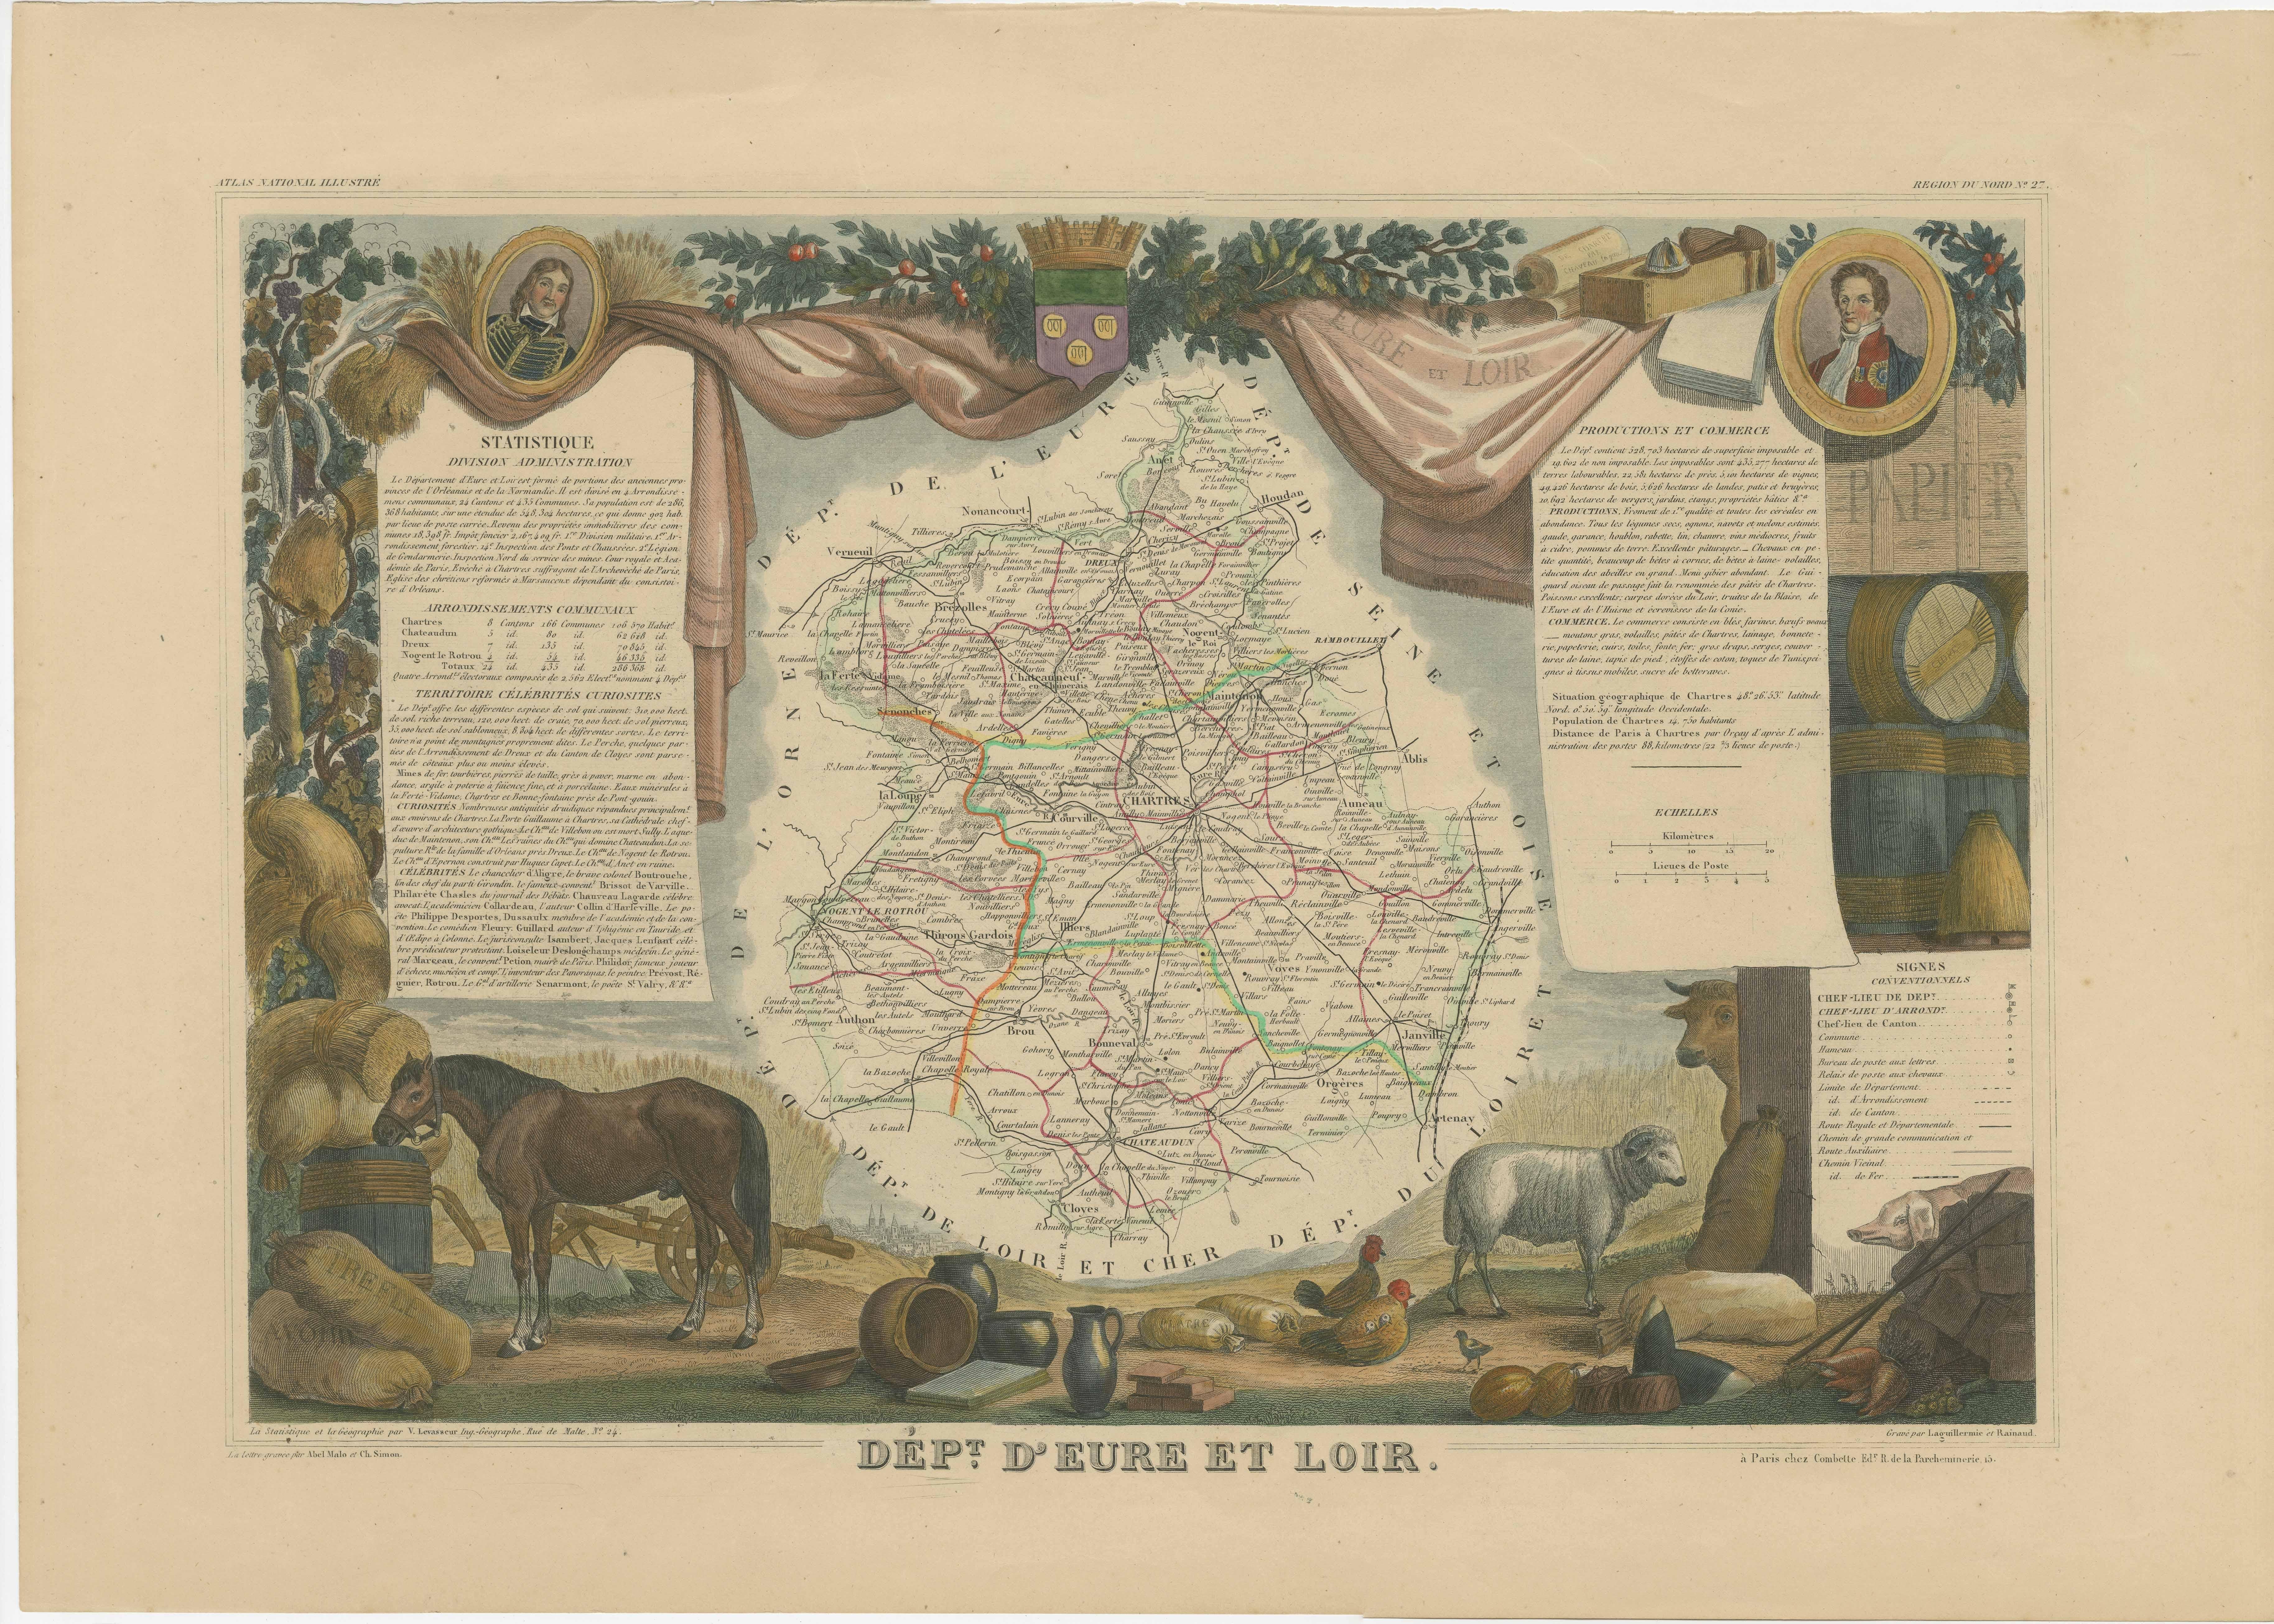 Antique map titled 'Dépt. d'Eure et Loir'. Map of the French department of Eure-et-Loir, France. This area is home to the famous Chartres Cathedral. The whole is surrounded by elaborate decorative engravings designed to illustrate both the natural